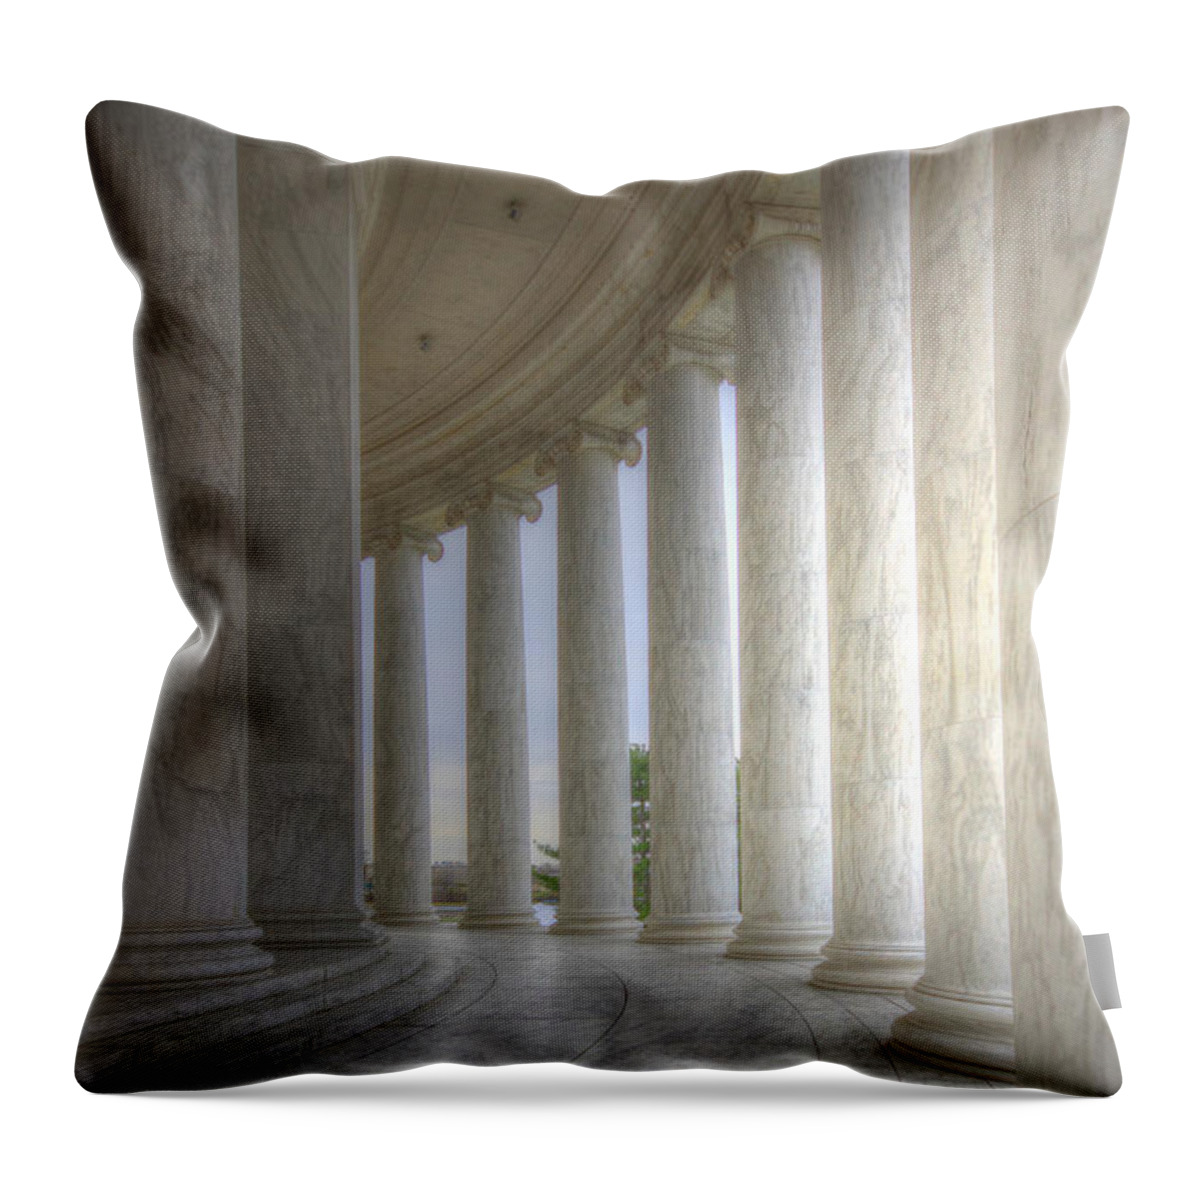 Sold Throw Pillow featuring the photograph Circular Colonnade of the Thomas Jefferson Memorial by Shelley Neff